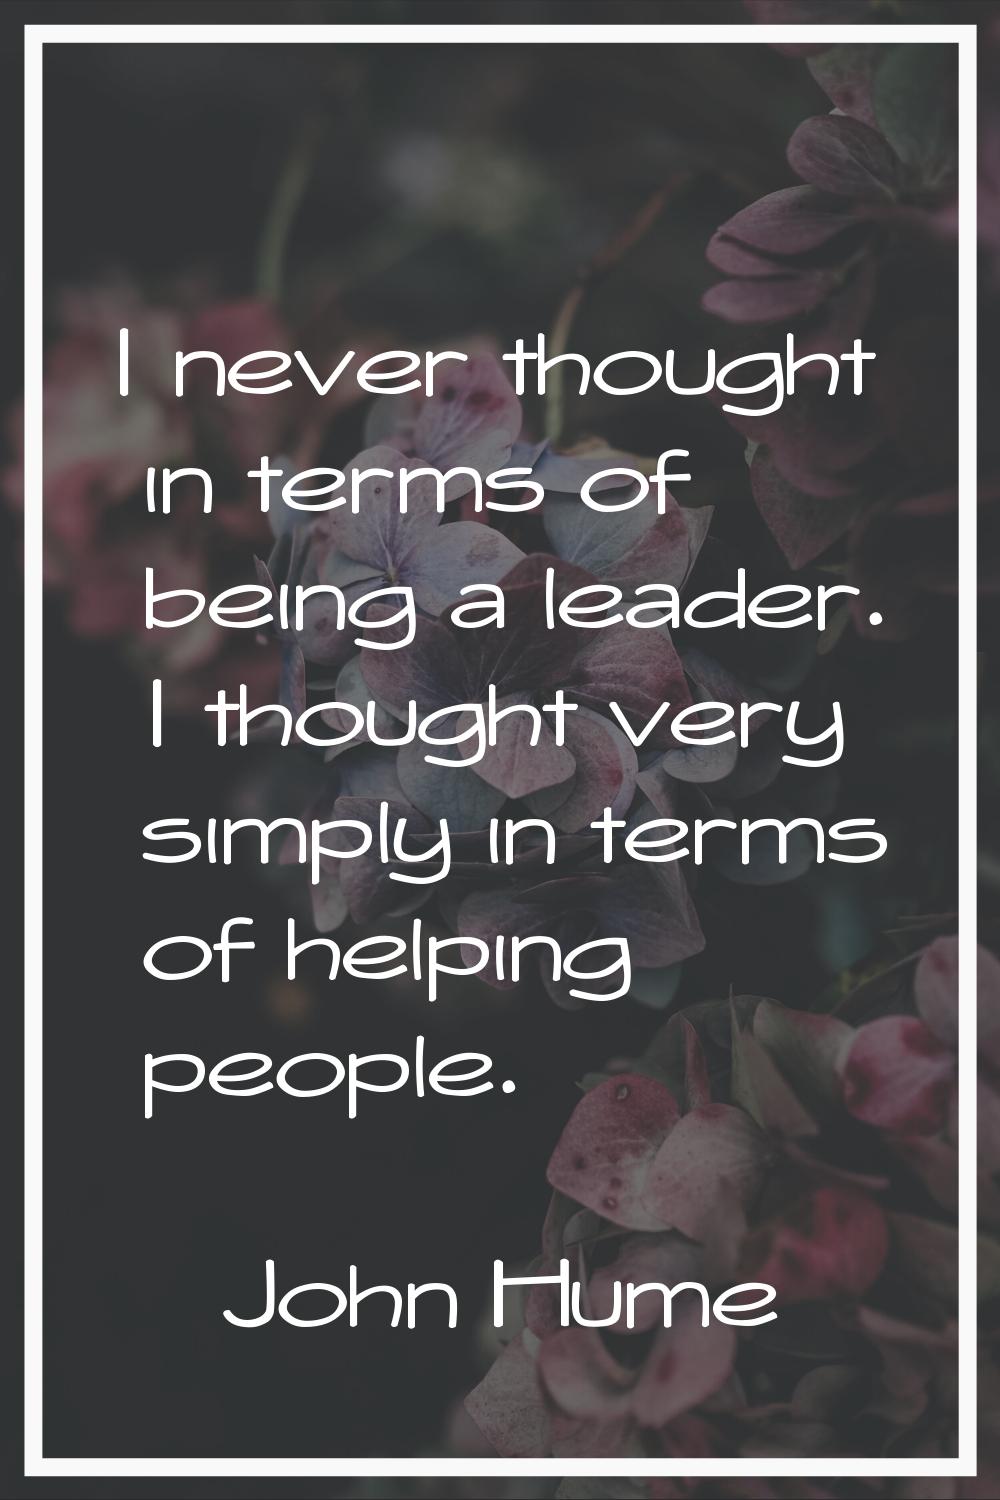 I never thought in terms of being a leader. I thought very simply in terms of helping people.